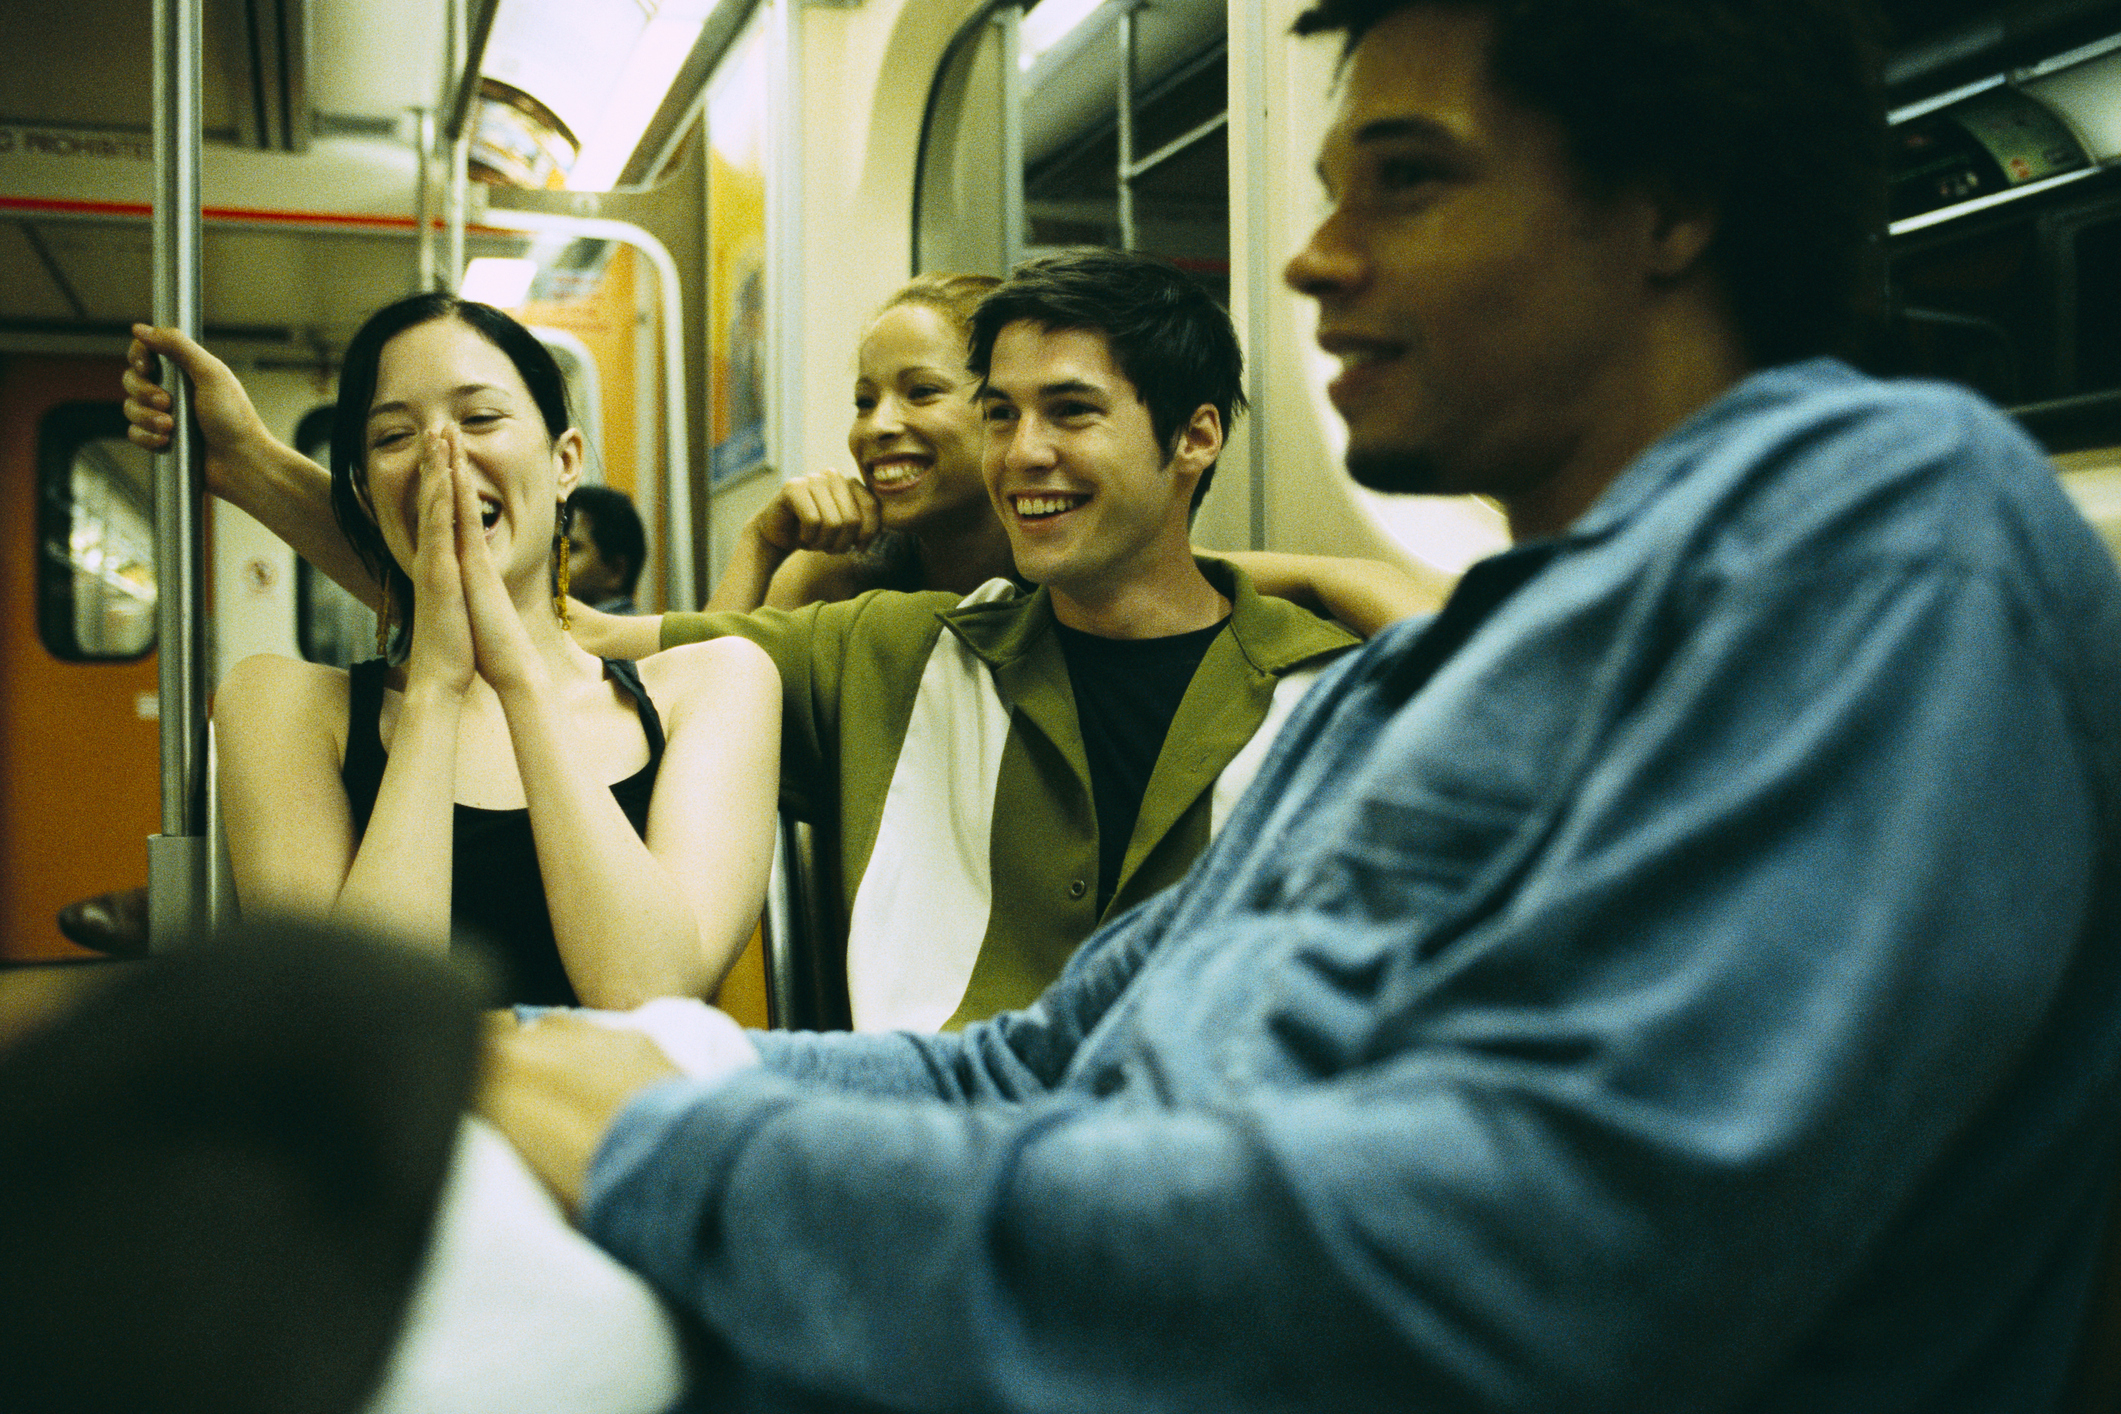 Four young adults, wearing casual clothing, laugh and chat while sitting on a train